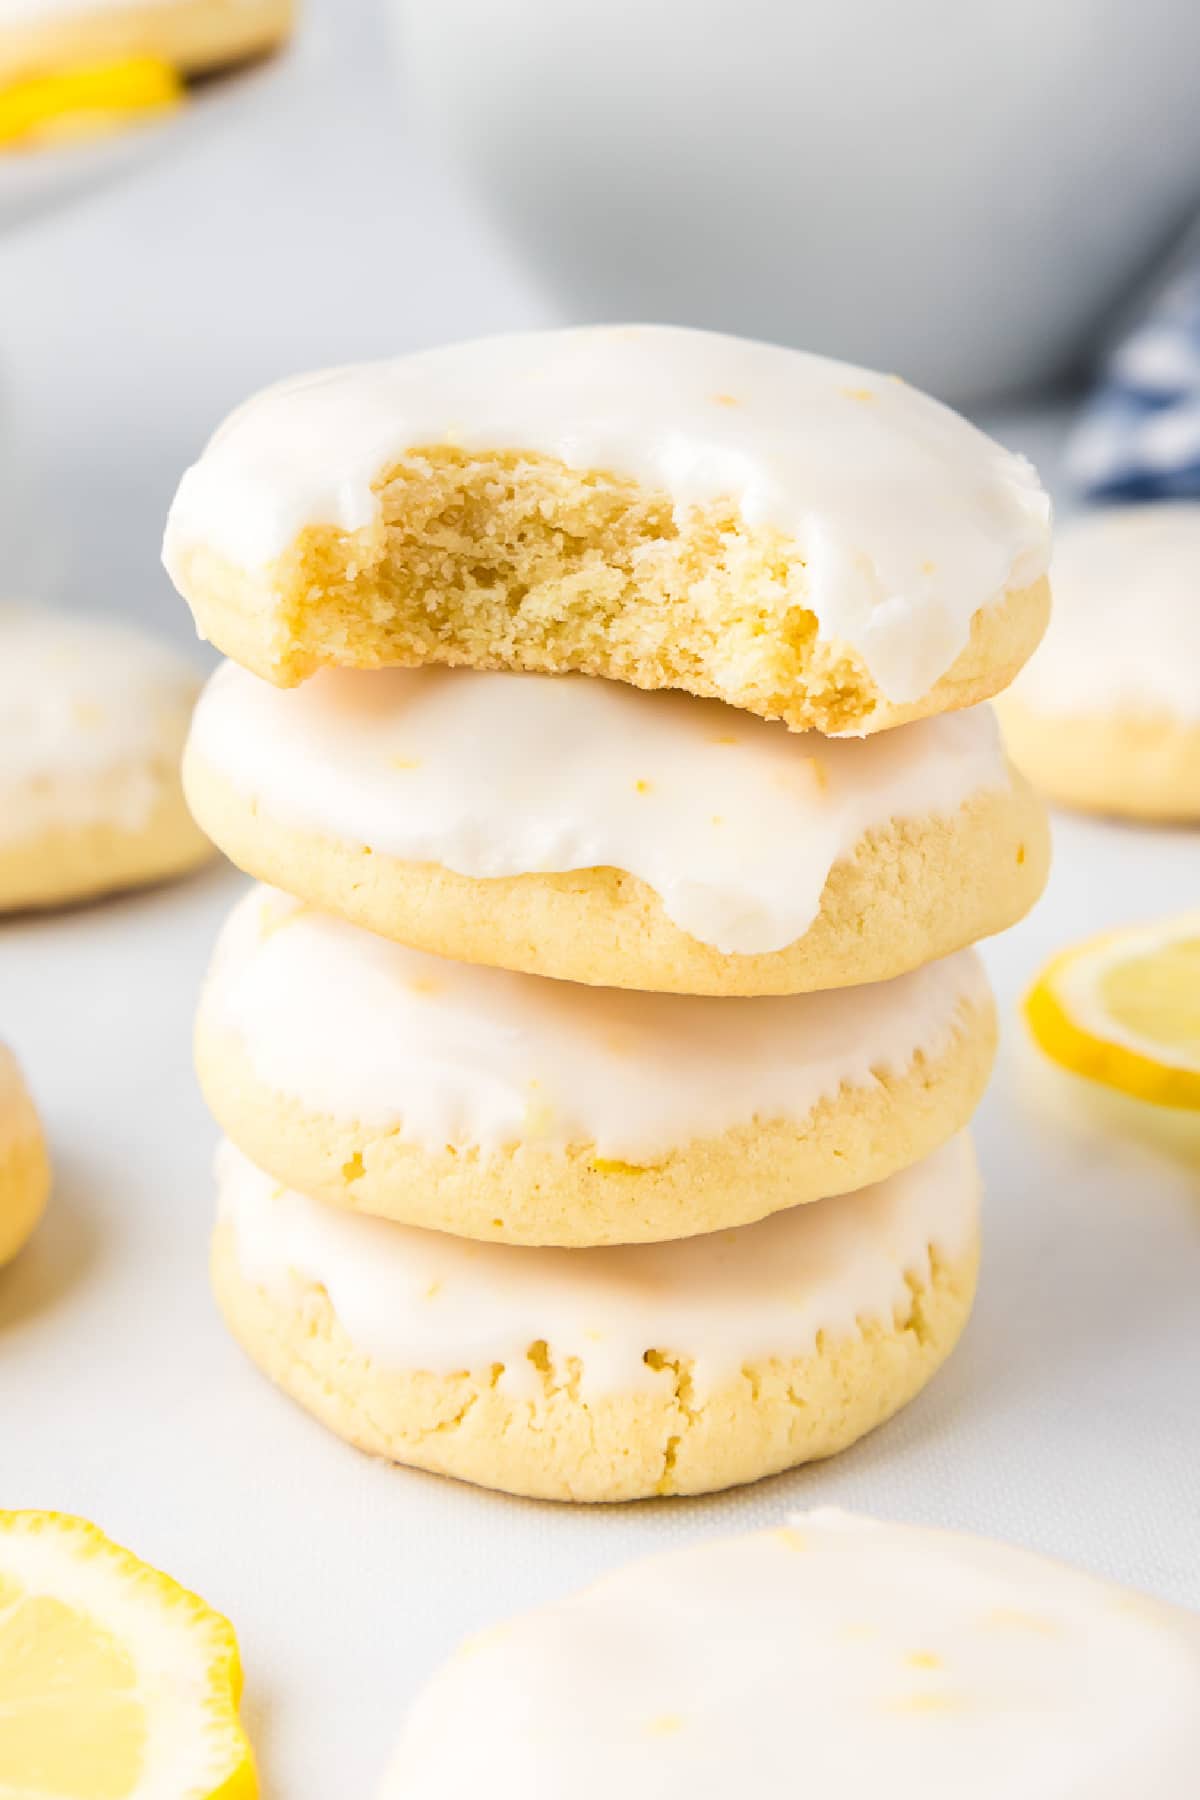 A stack of lemon cookies topped with glaze up close with a bite missing from one cookie..